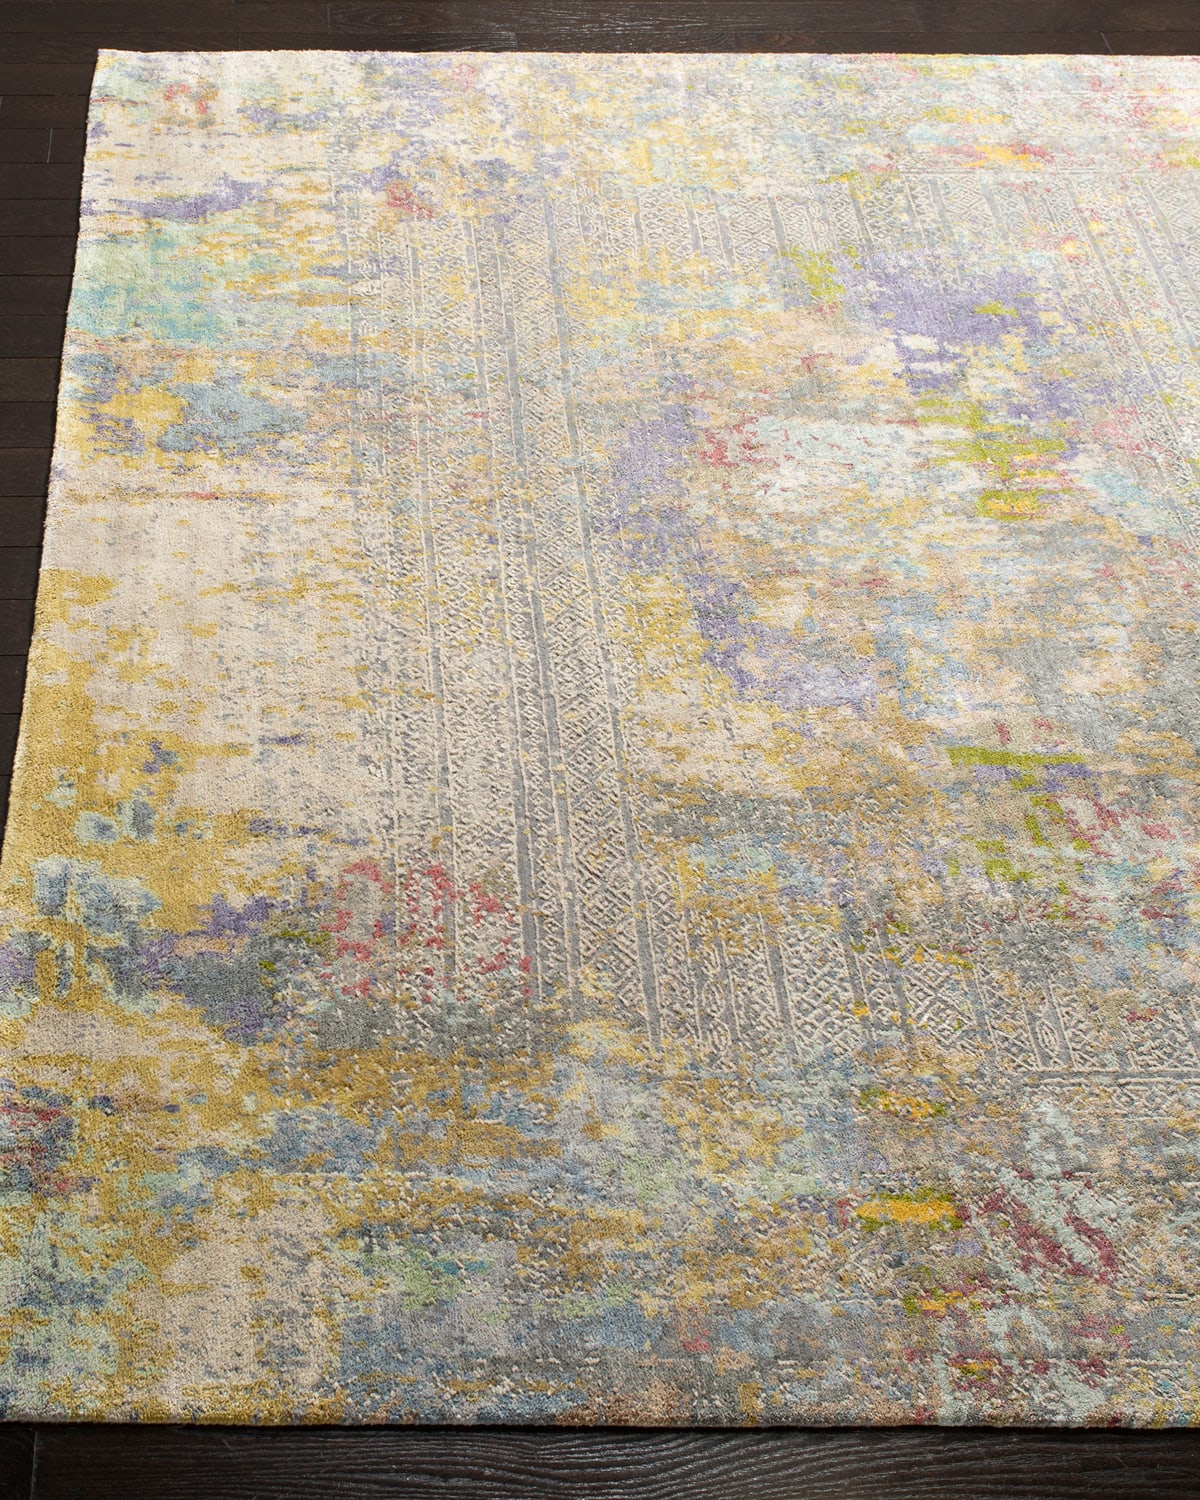 Weston Hand-Knotted Wool Rug, 9' x 12'